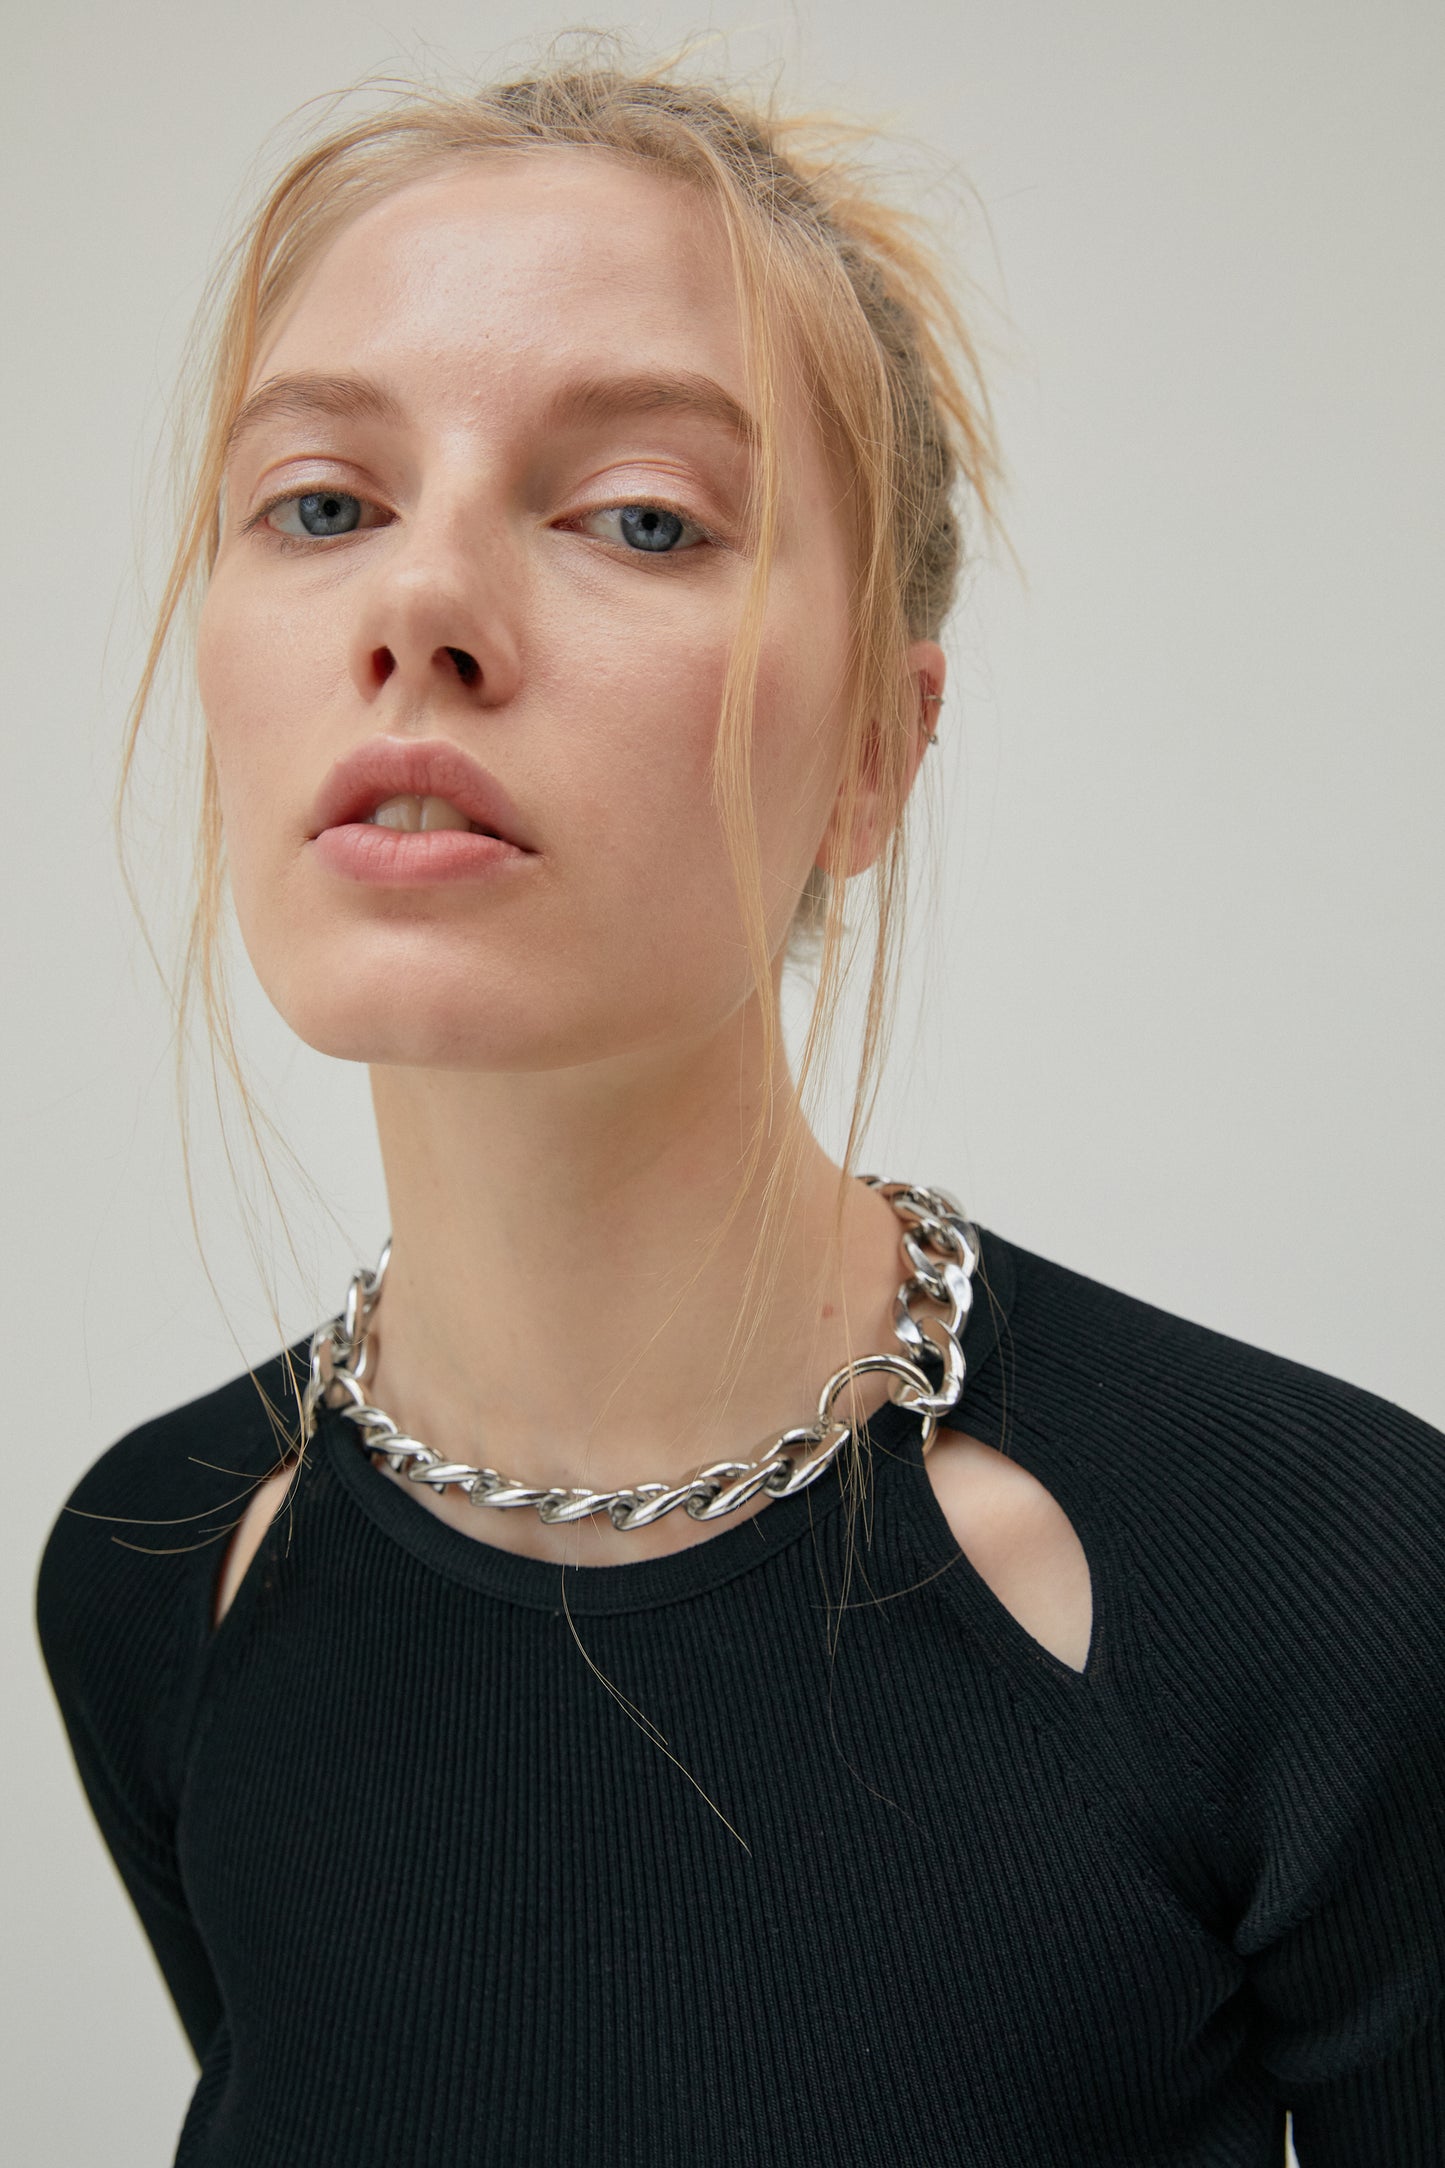 Ribbed Knit With Chain Necklace, Black